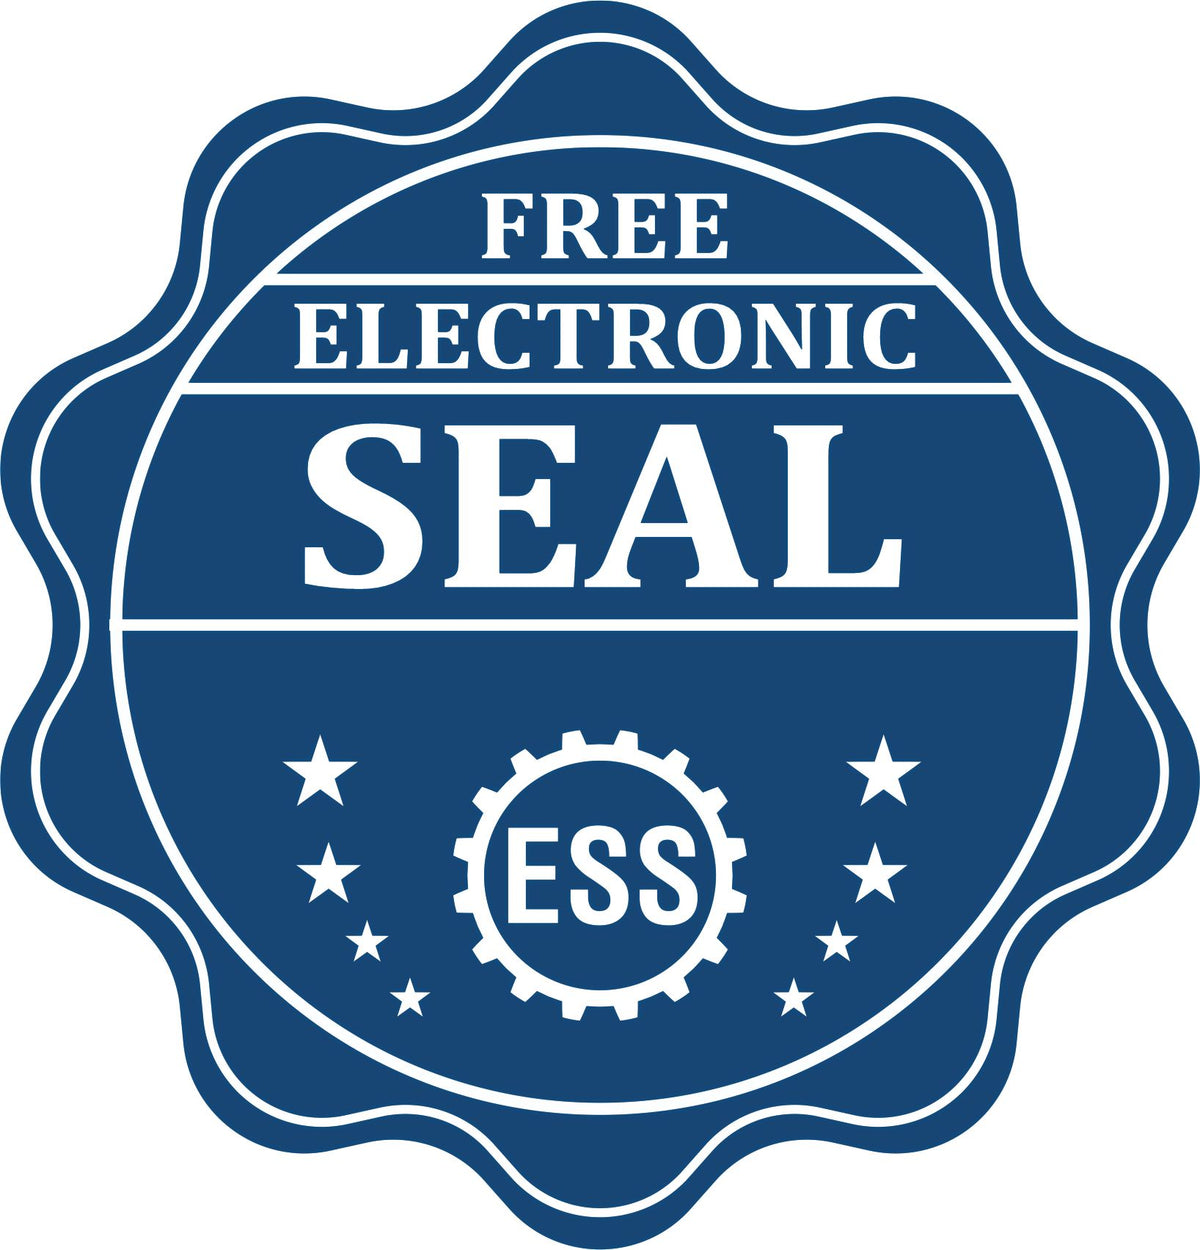 A badge showing a free electronic seal for the Heavy Duty Cast Iron New Jersey Architect Embosser with stars and the ESS gear on the emblem.